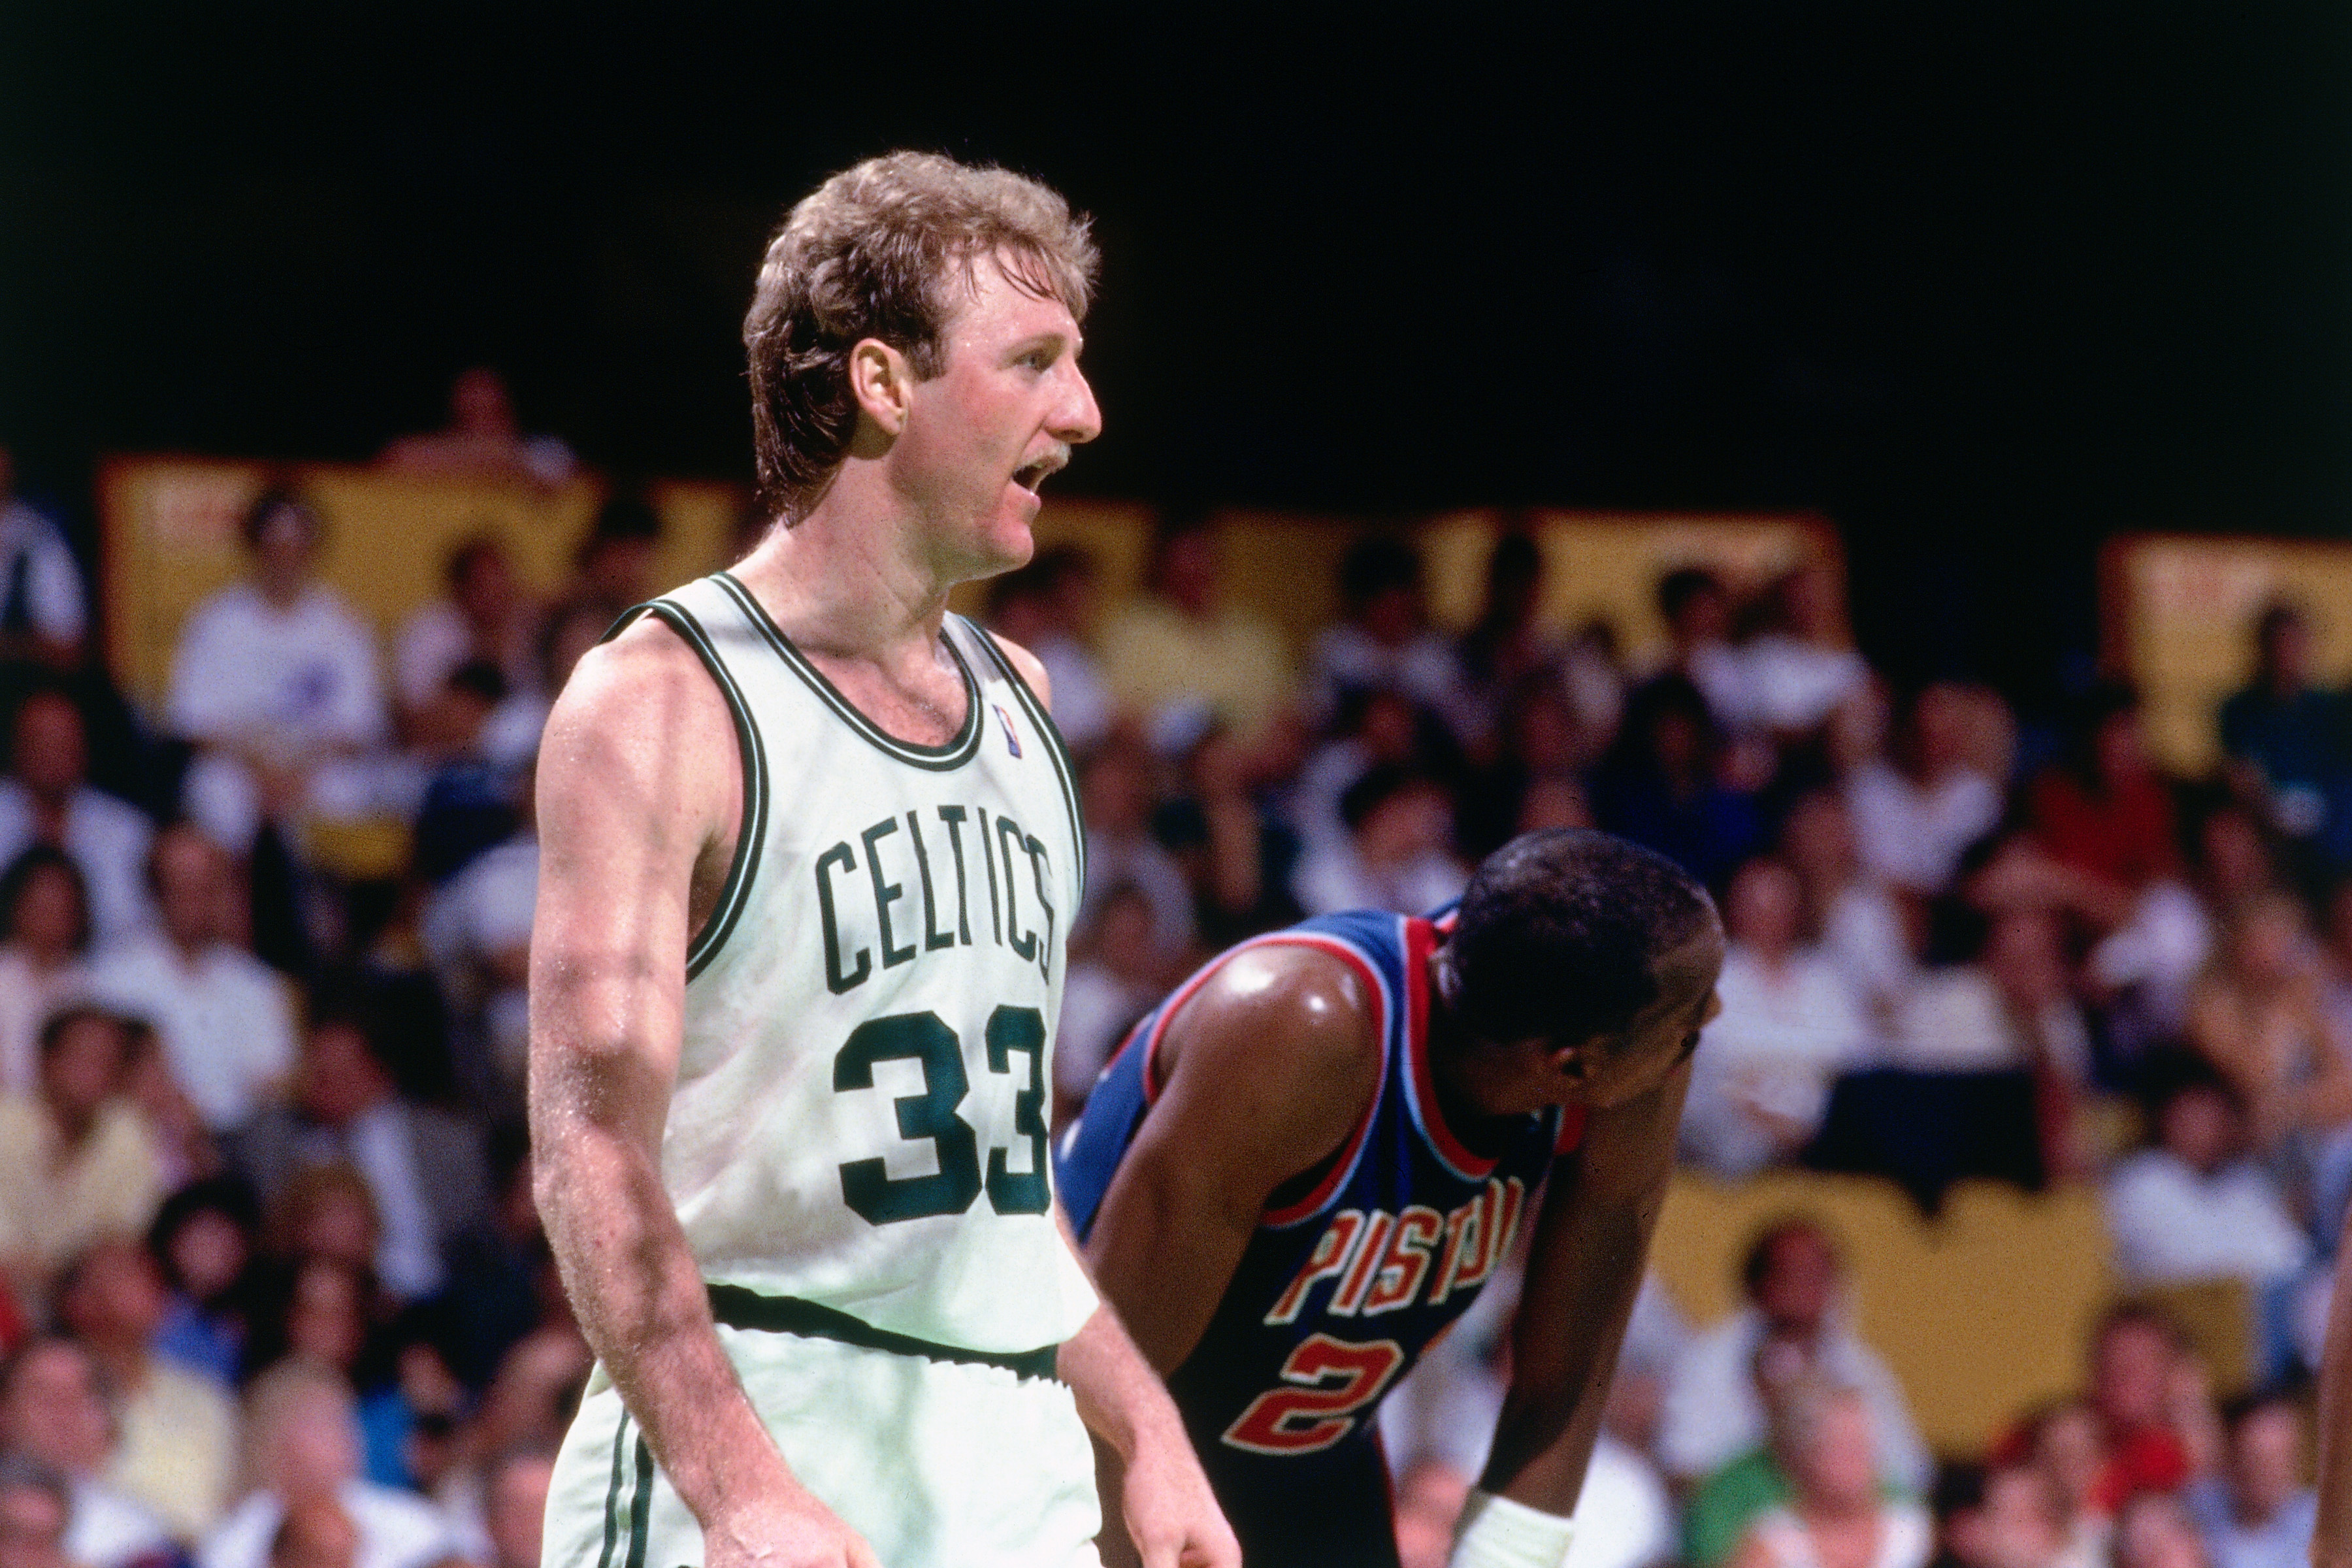 CIRCA 1987: Larry Bird #33 of the Boston Celtics playing the Pistons. (Photo by Jerry Wachter/Sports Imagery/Getty Images)